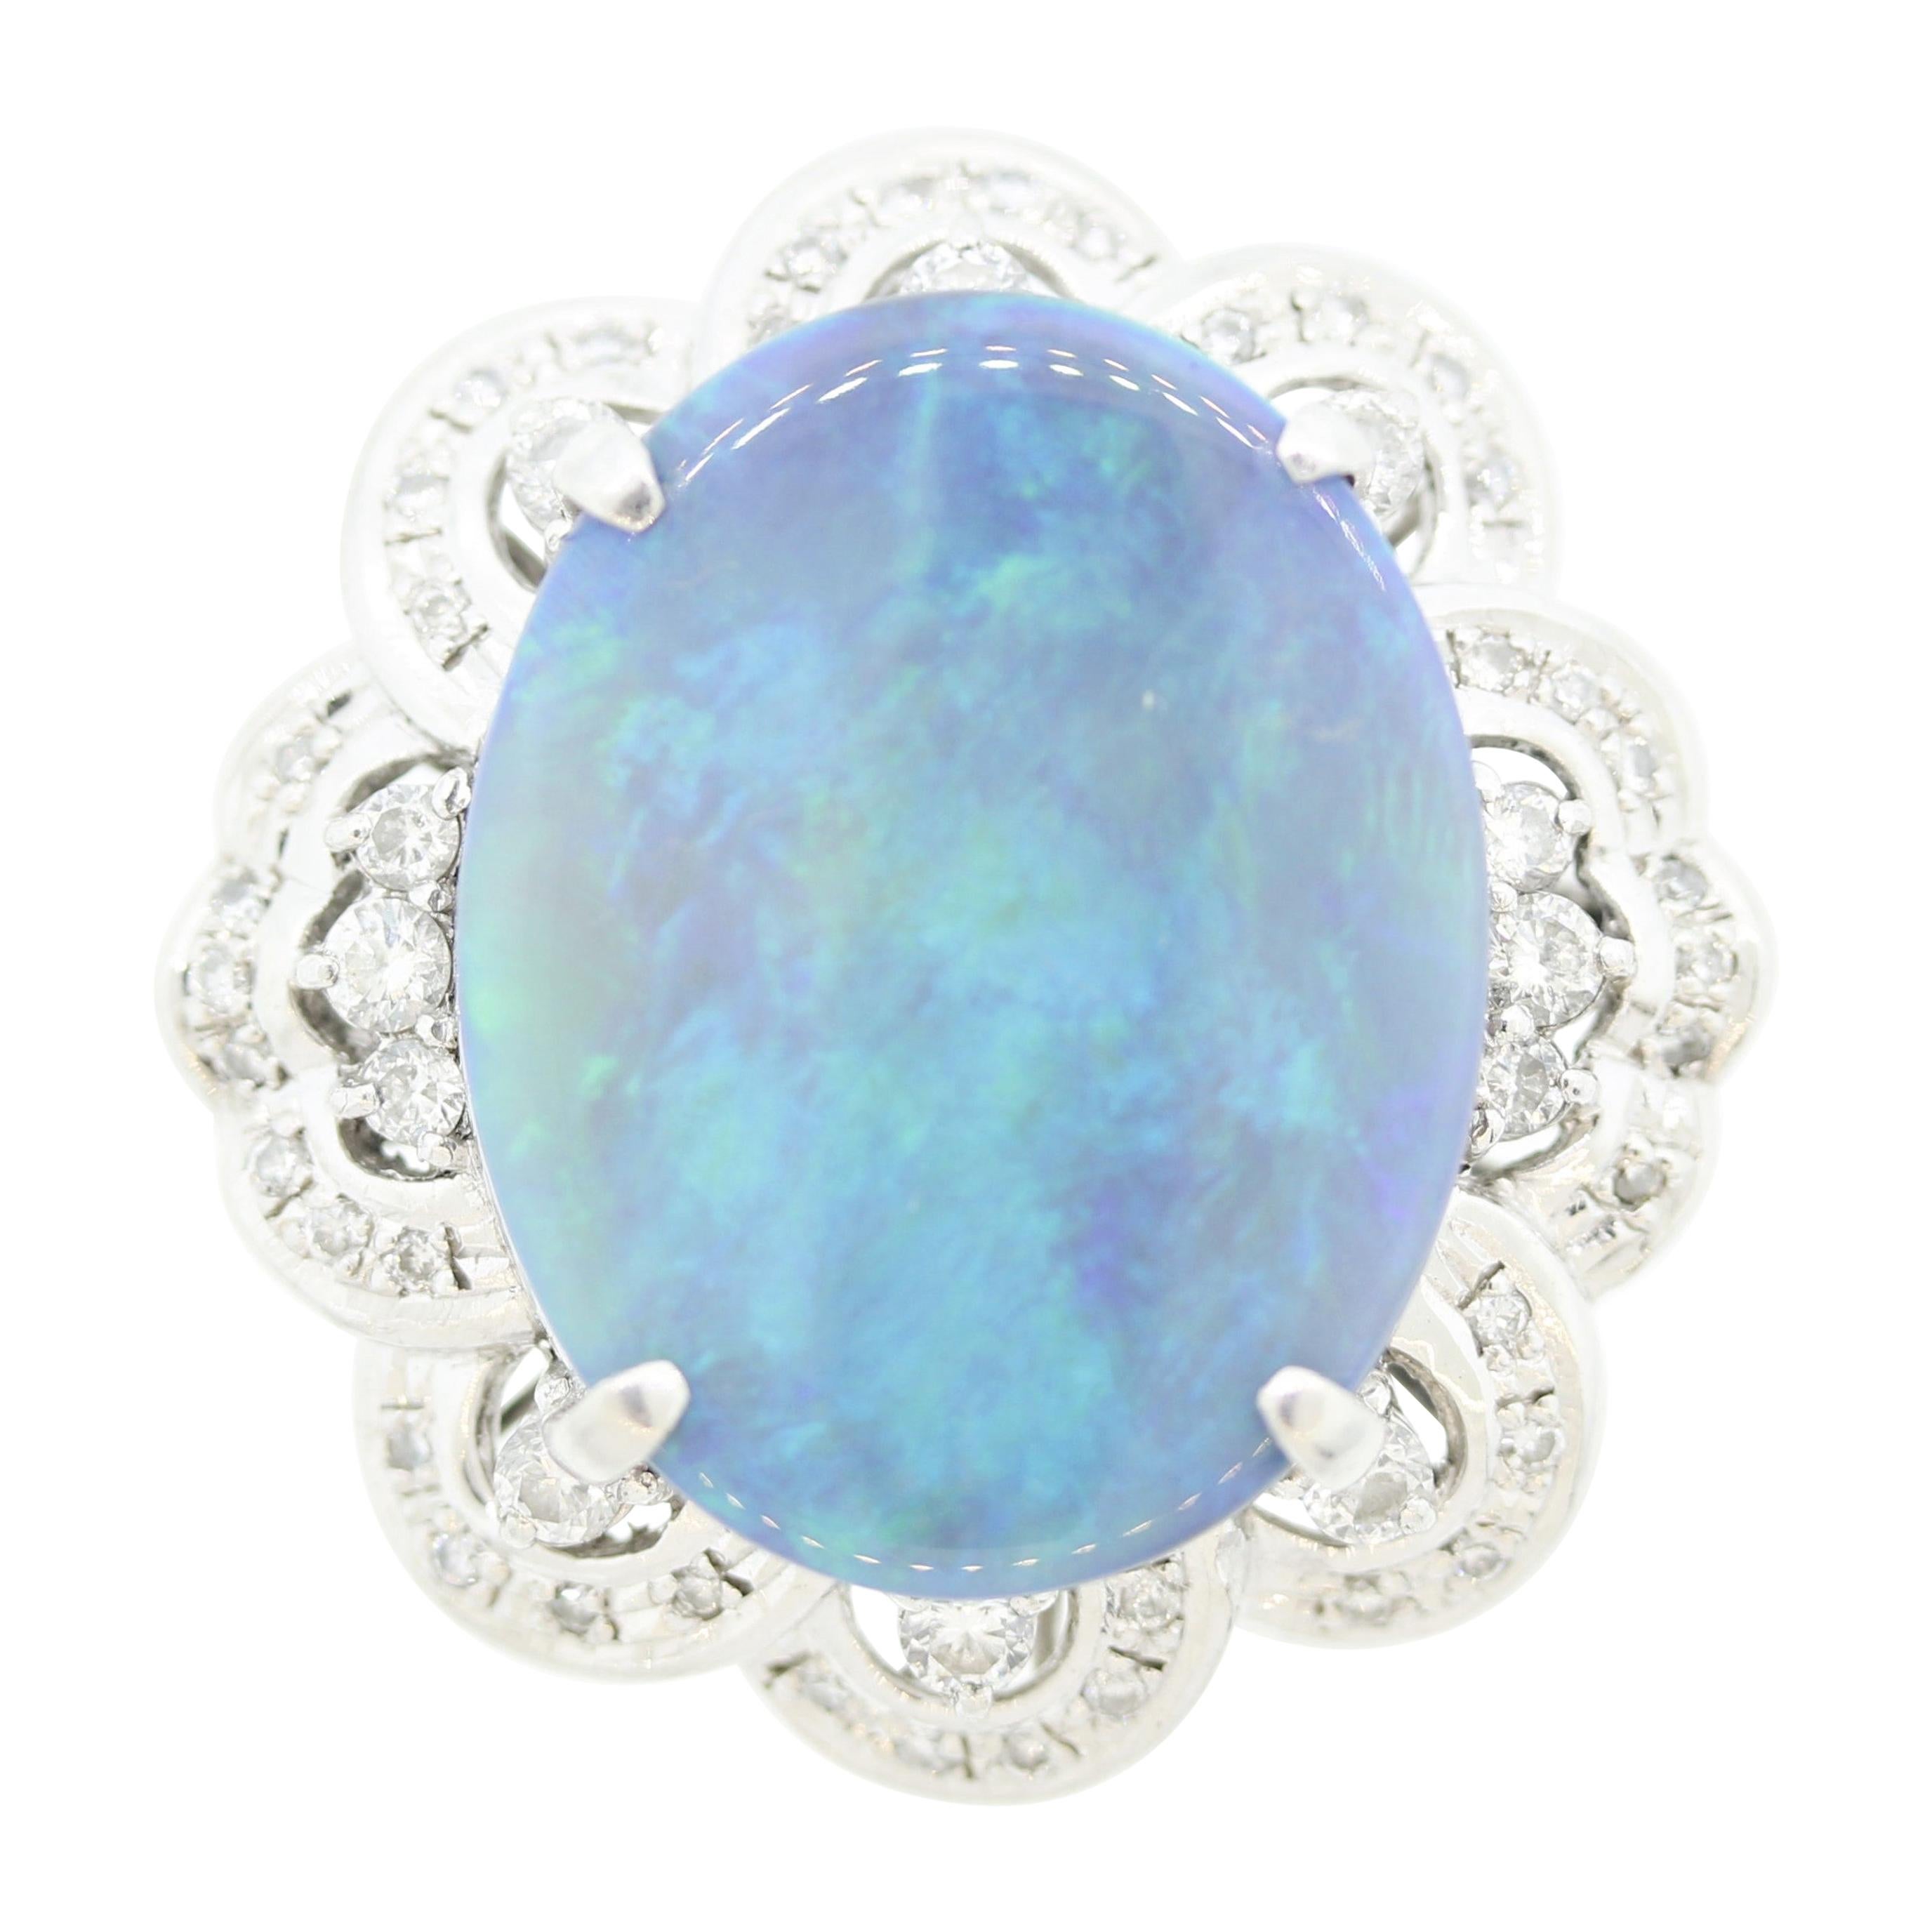 Can opal rings be worn everyday?